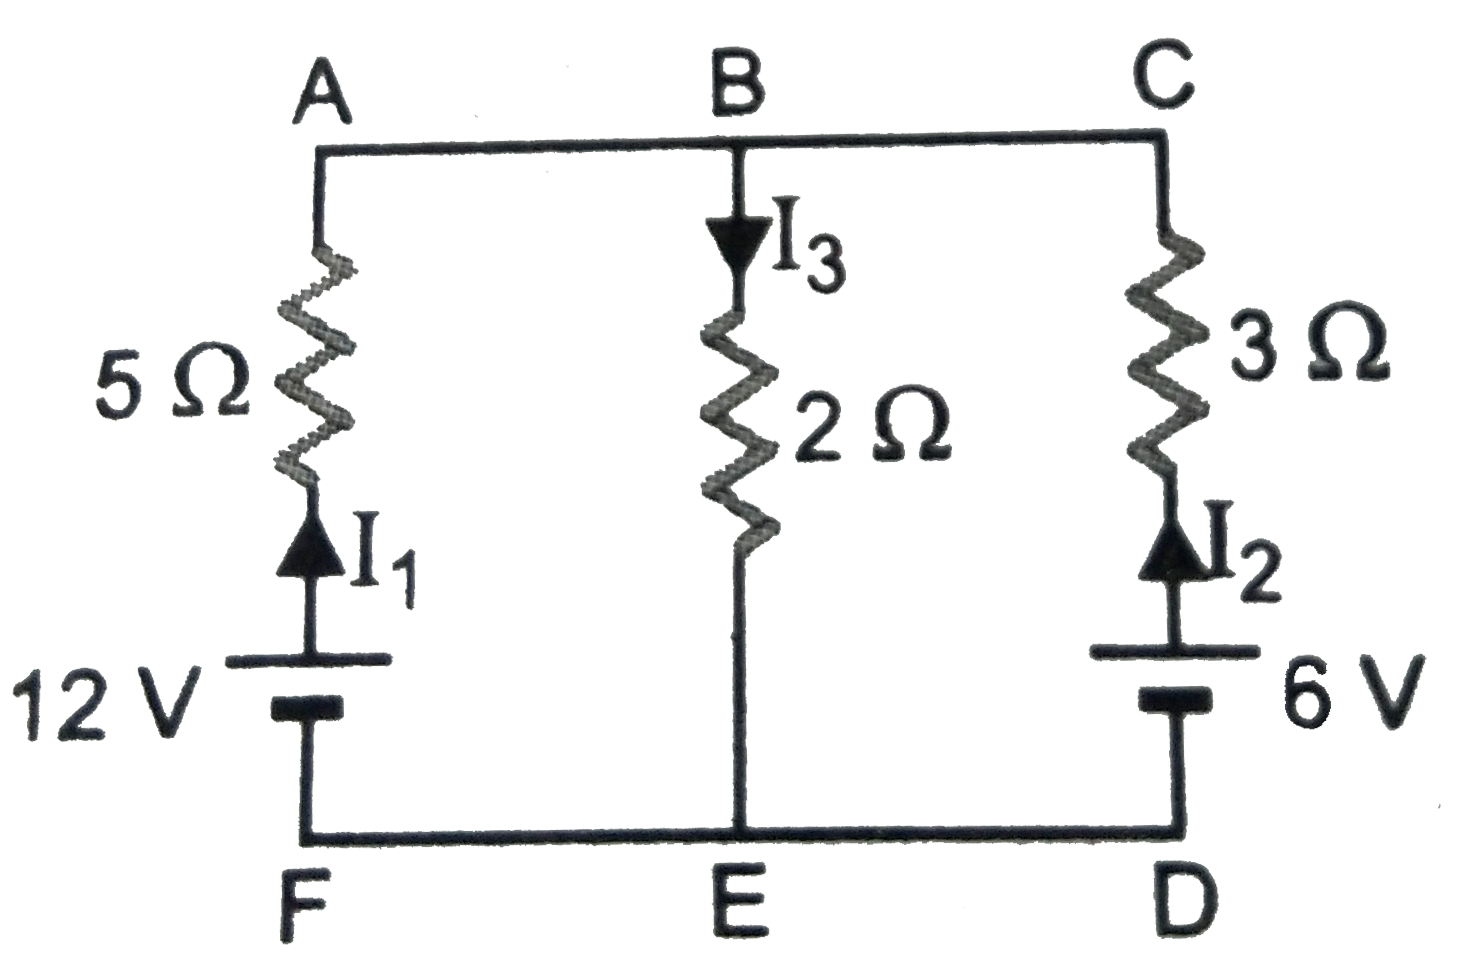 Using Kirchoff's laws in the electrical net work shown in figure, calculate the values of I(1),I(2) and I(3).